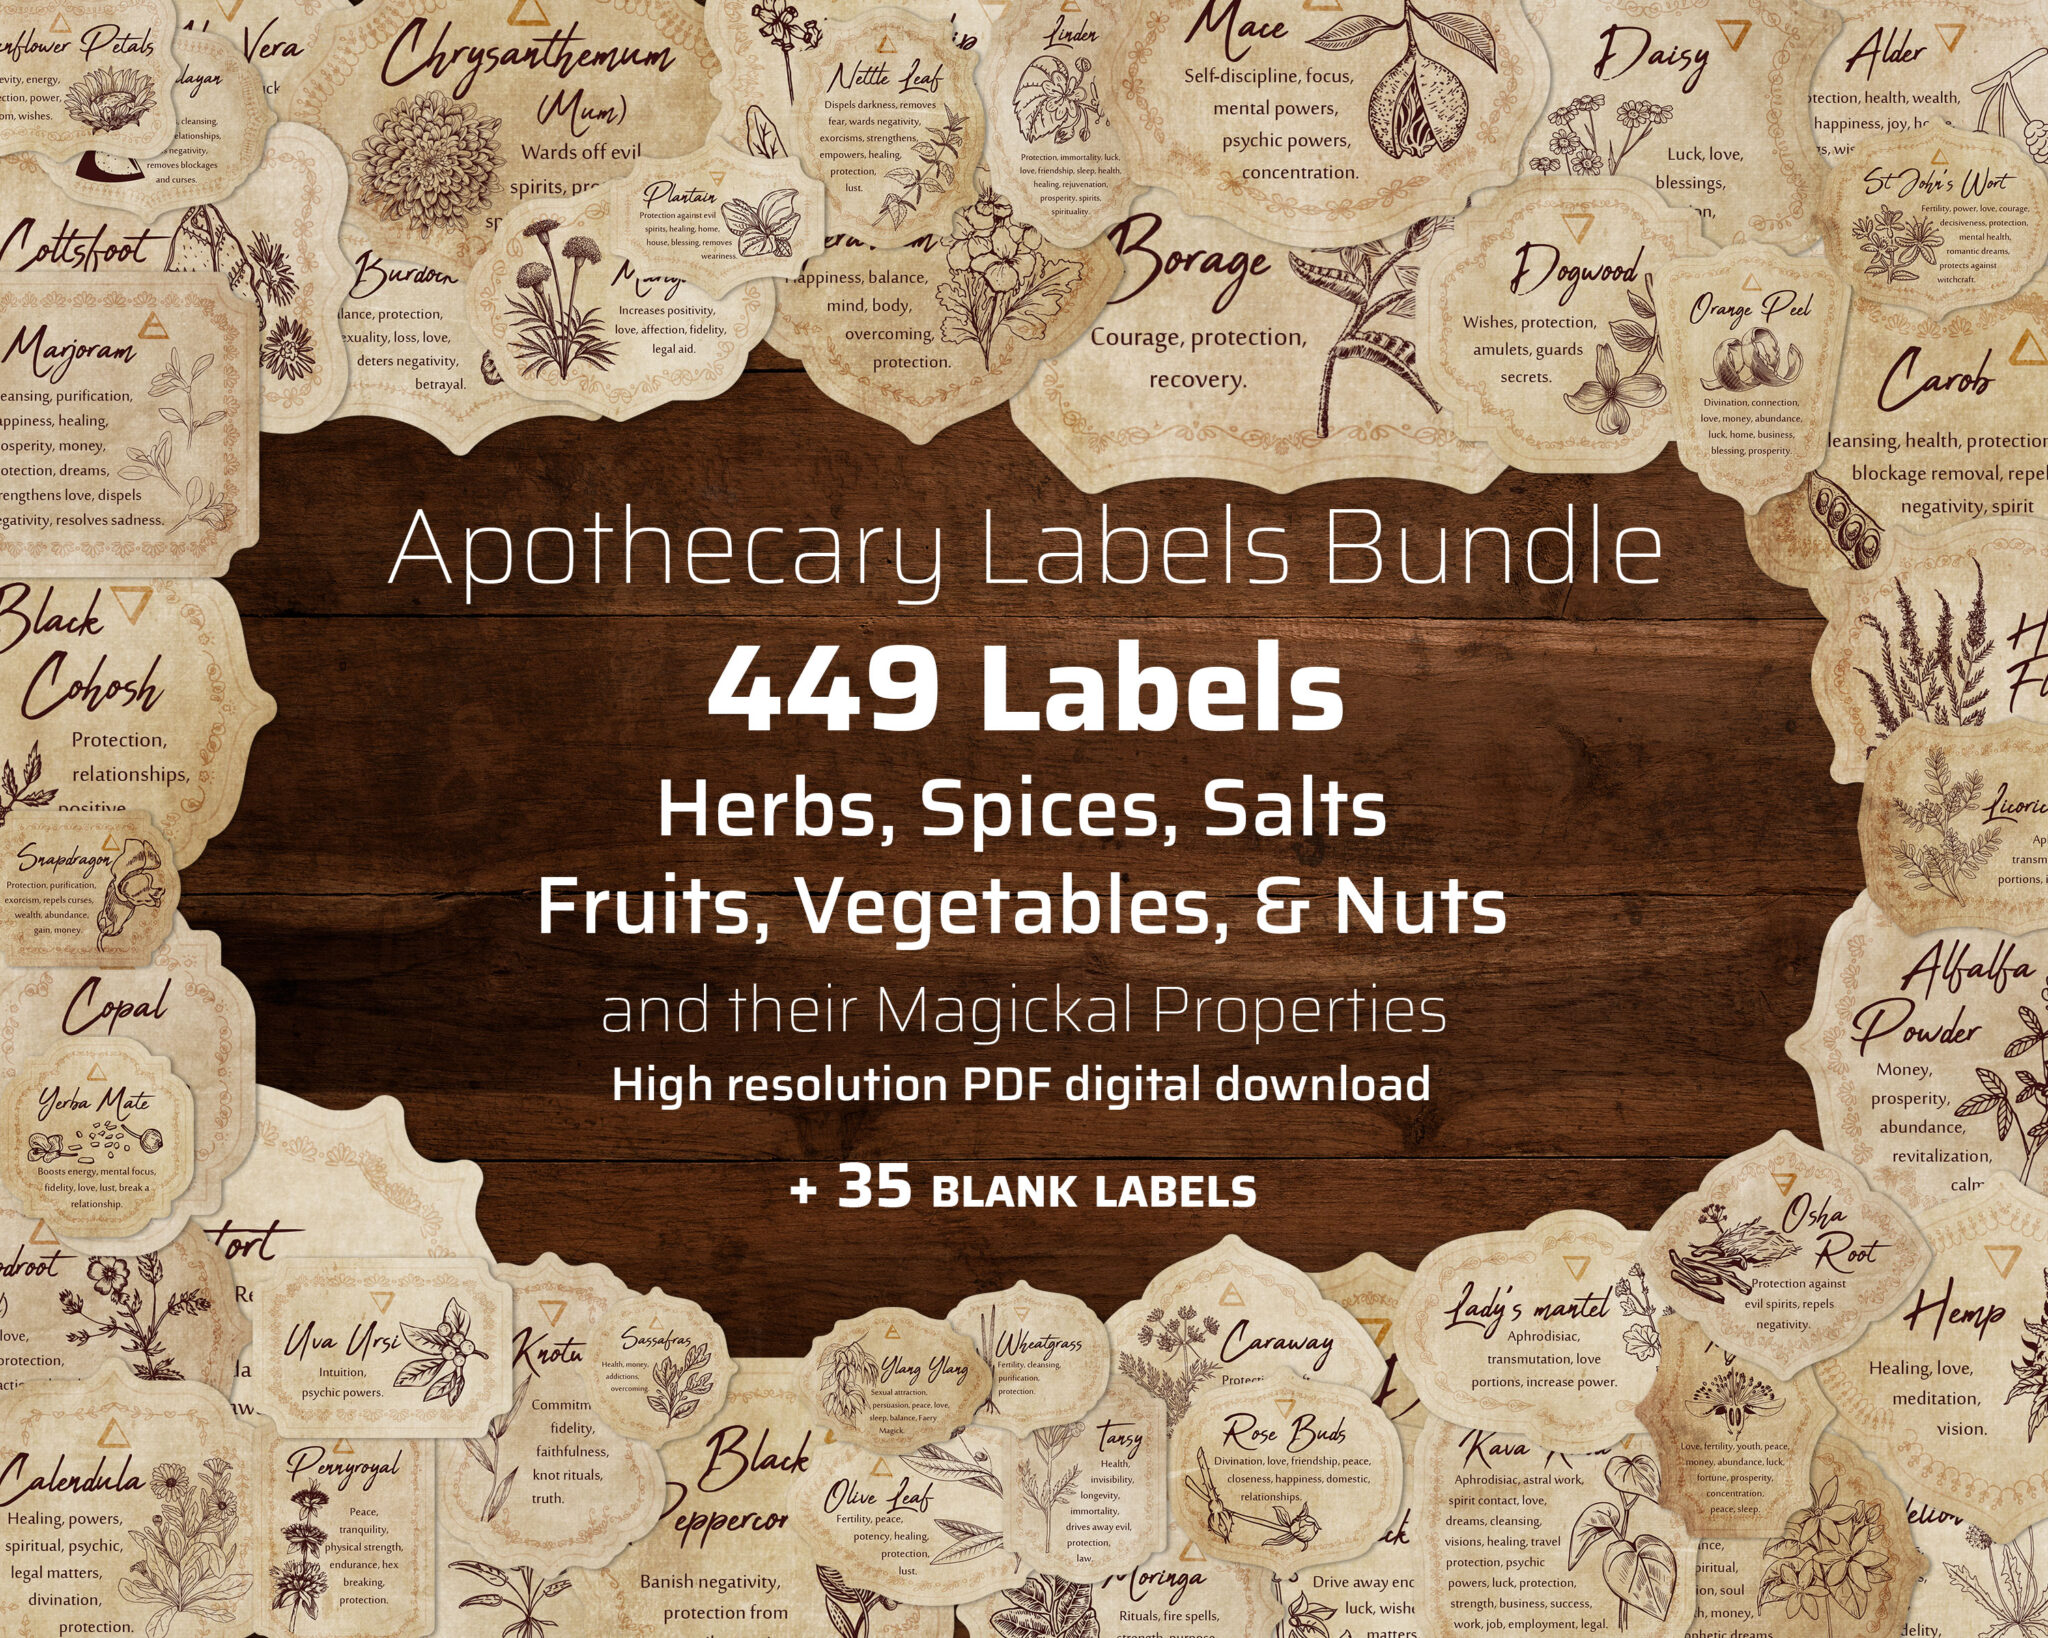 100 HERBAL APOTHECARY LABELS Printable – Morgana Magick Spell